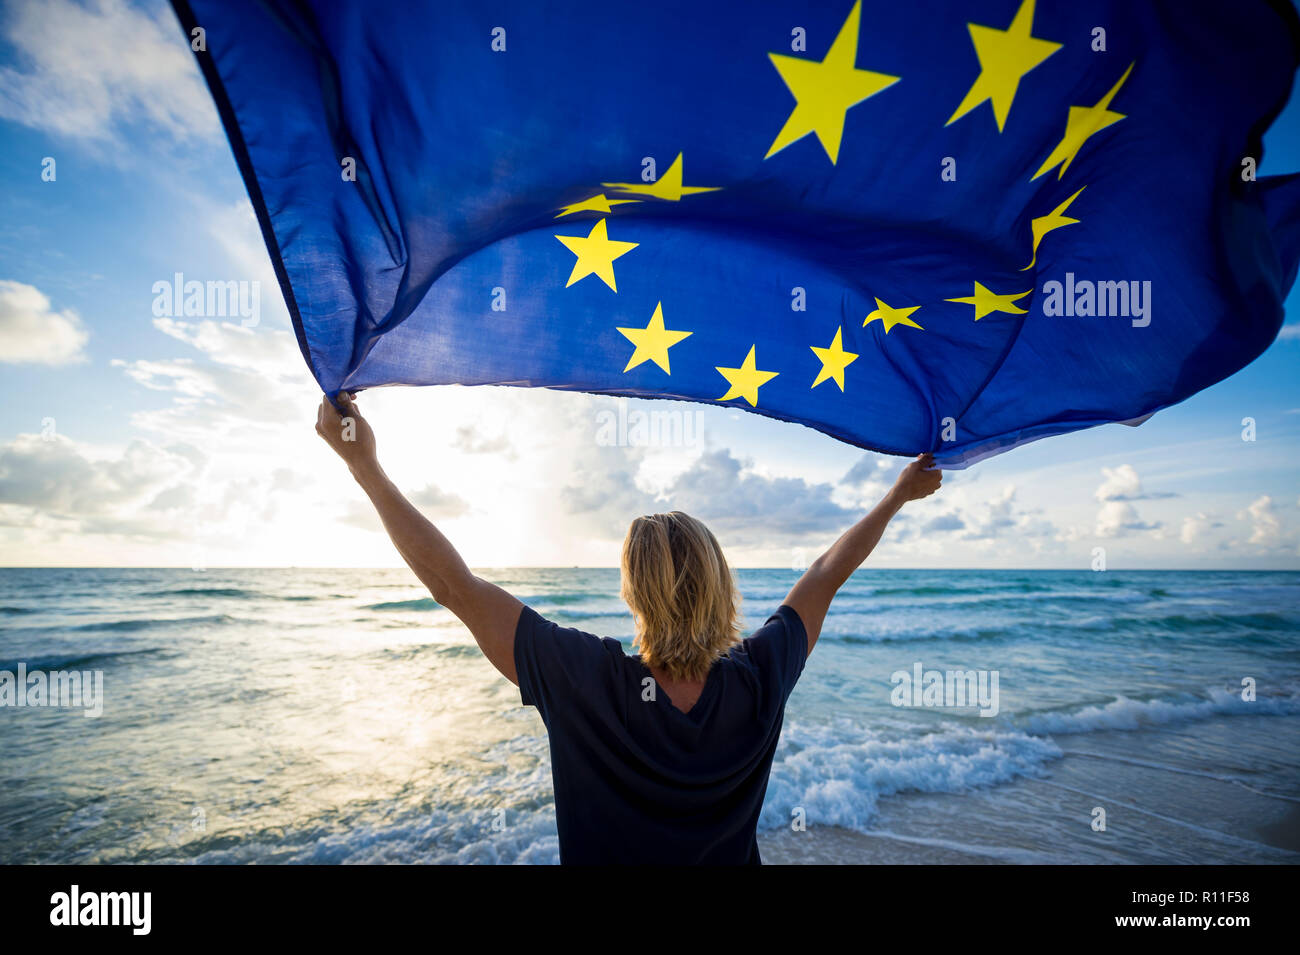 Man with blond hair standing on the shore of a Mediterranean beach holding a European Union EU flag blowing in the wind Stock Photo